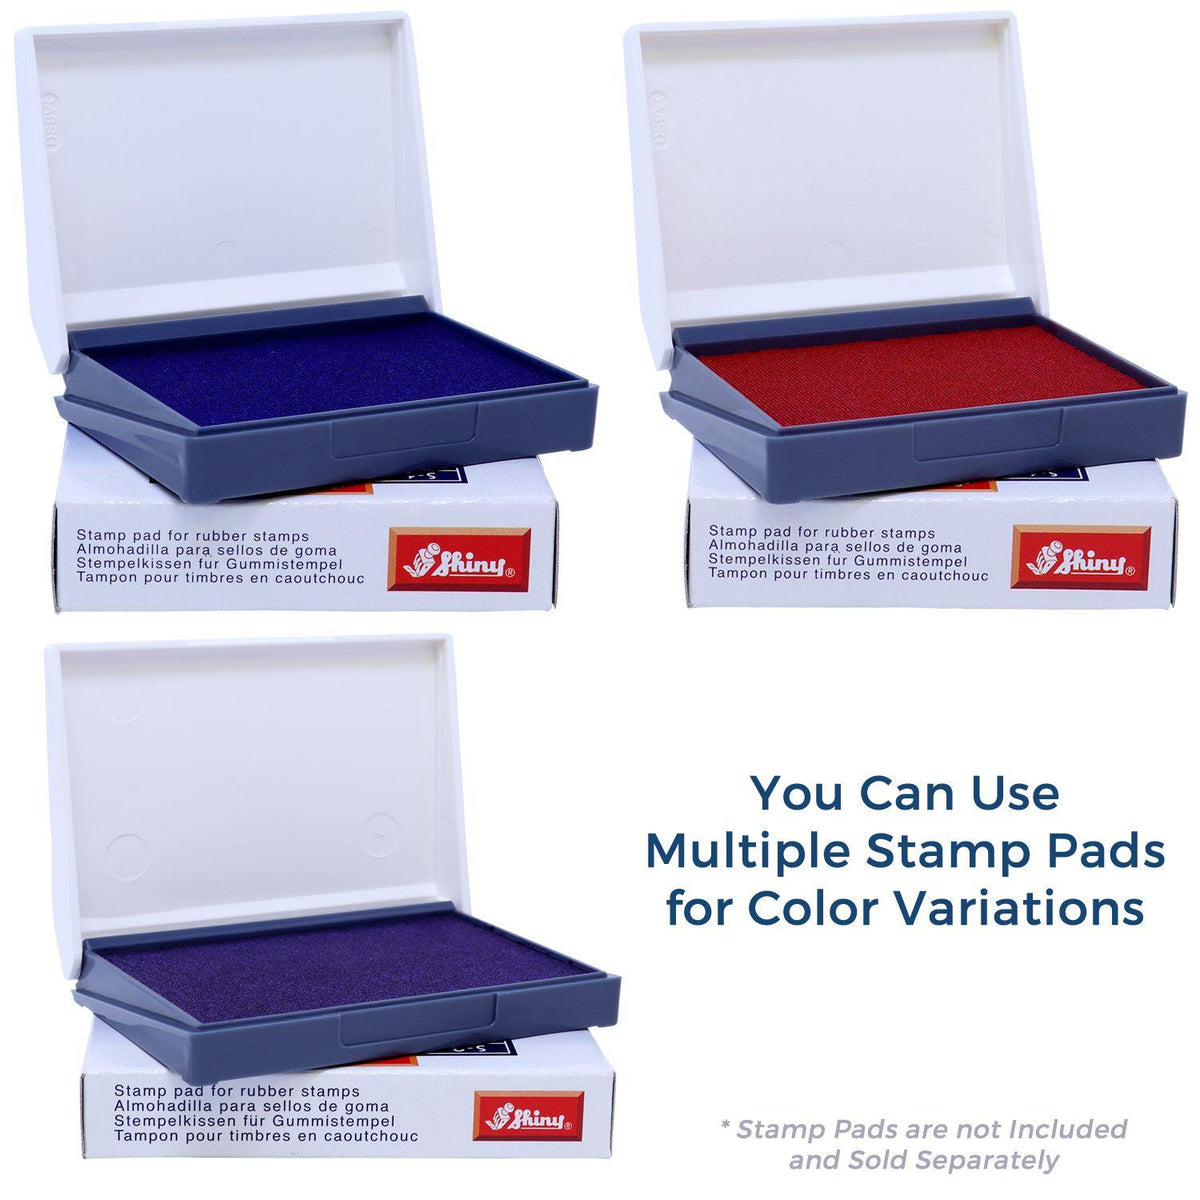 Stamp Pads for File Rubber Stamp Available